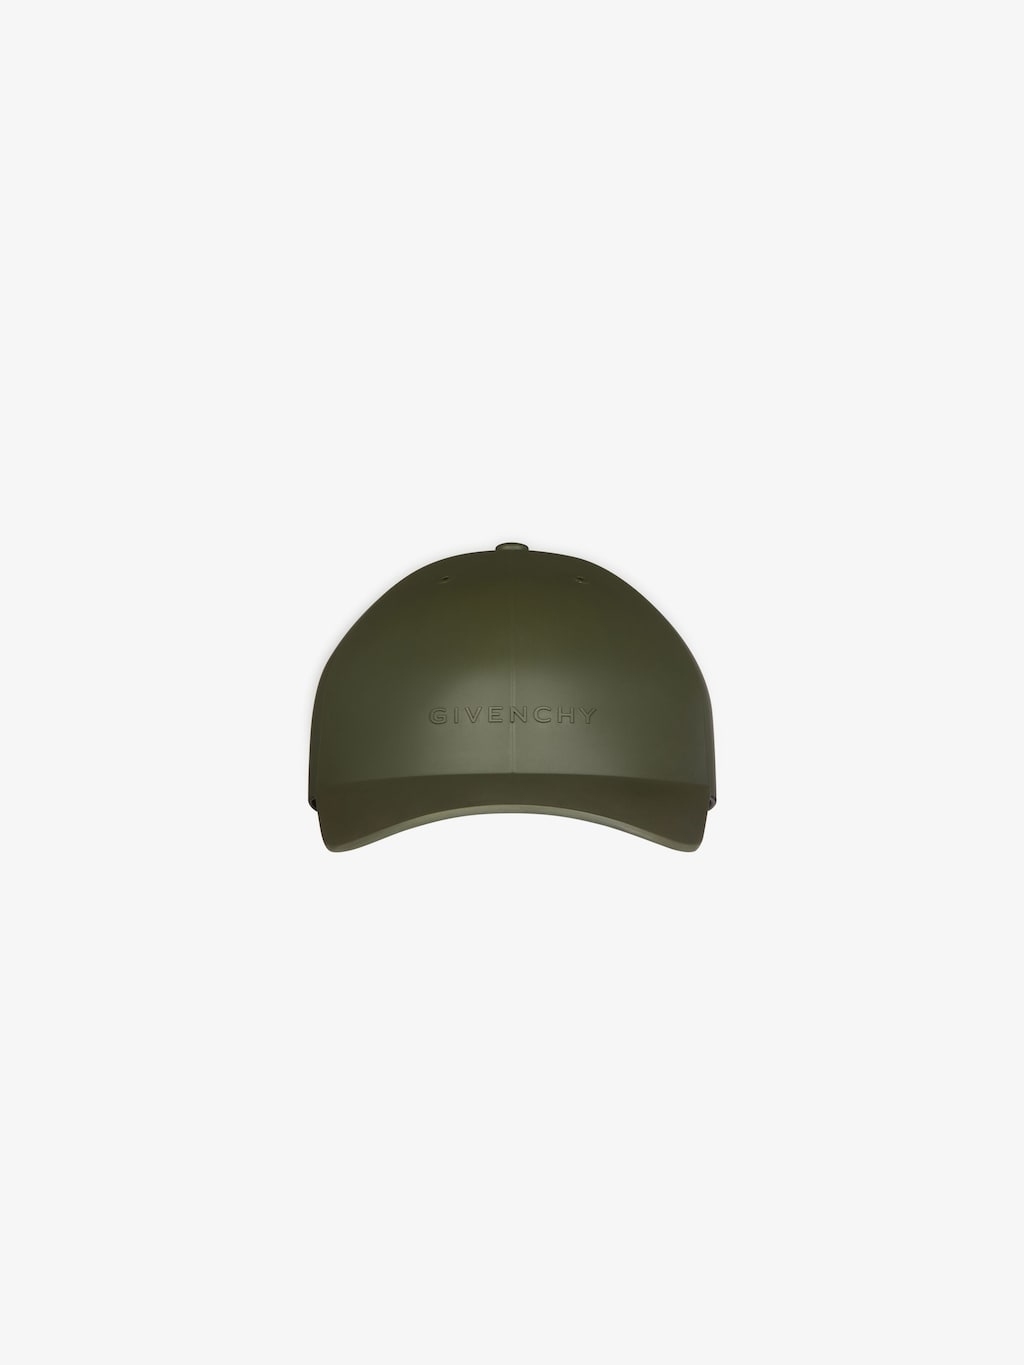 givenchy.com | Cap in GIVENCHY mould rubber